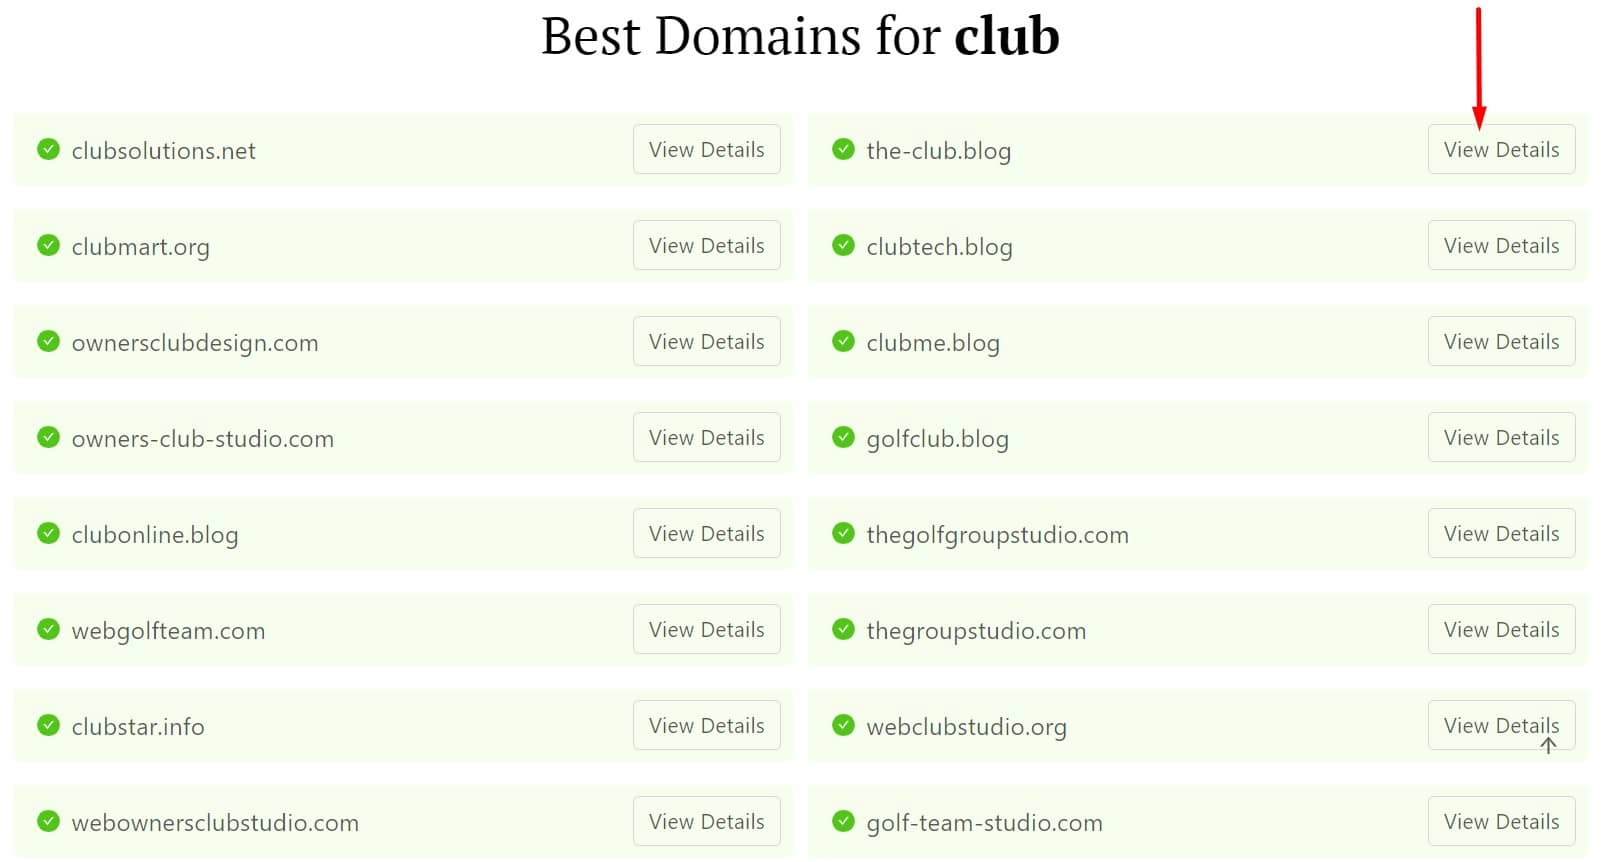 DomainWheel club name generator search results with a red arrow pointing to the "View Details" button for the top right result